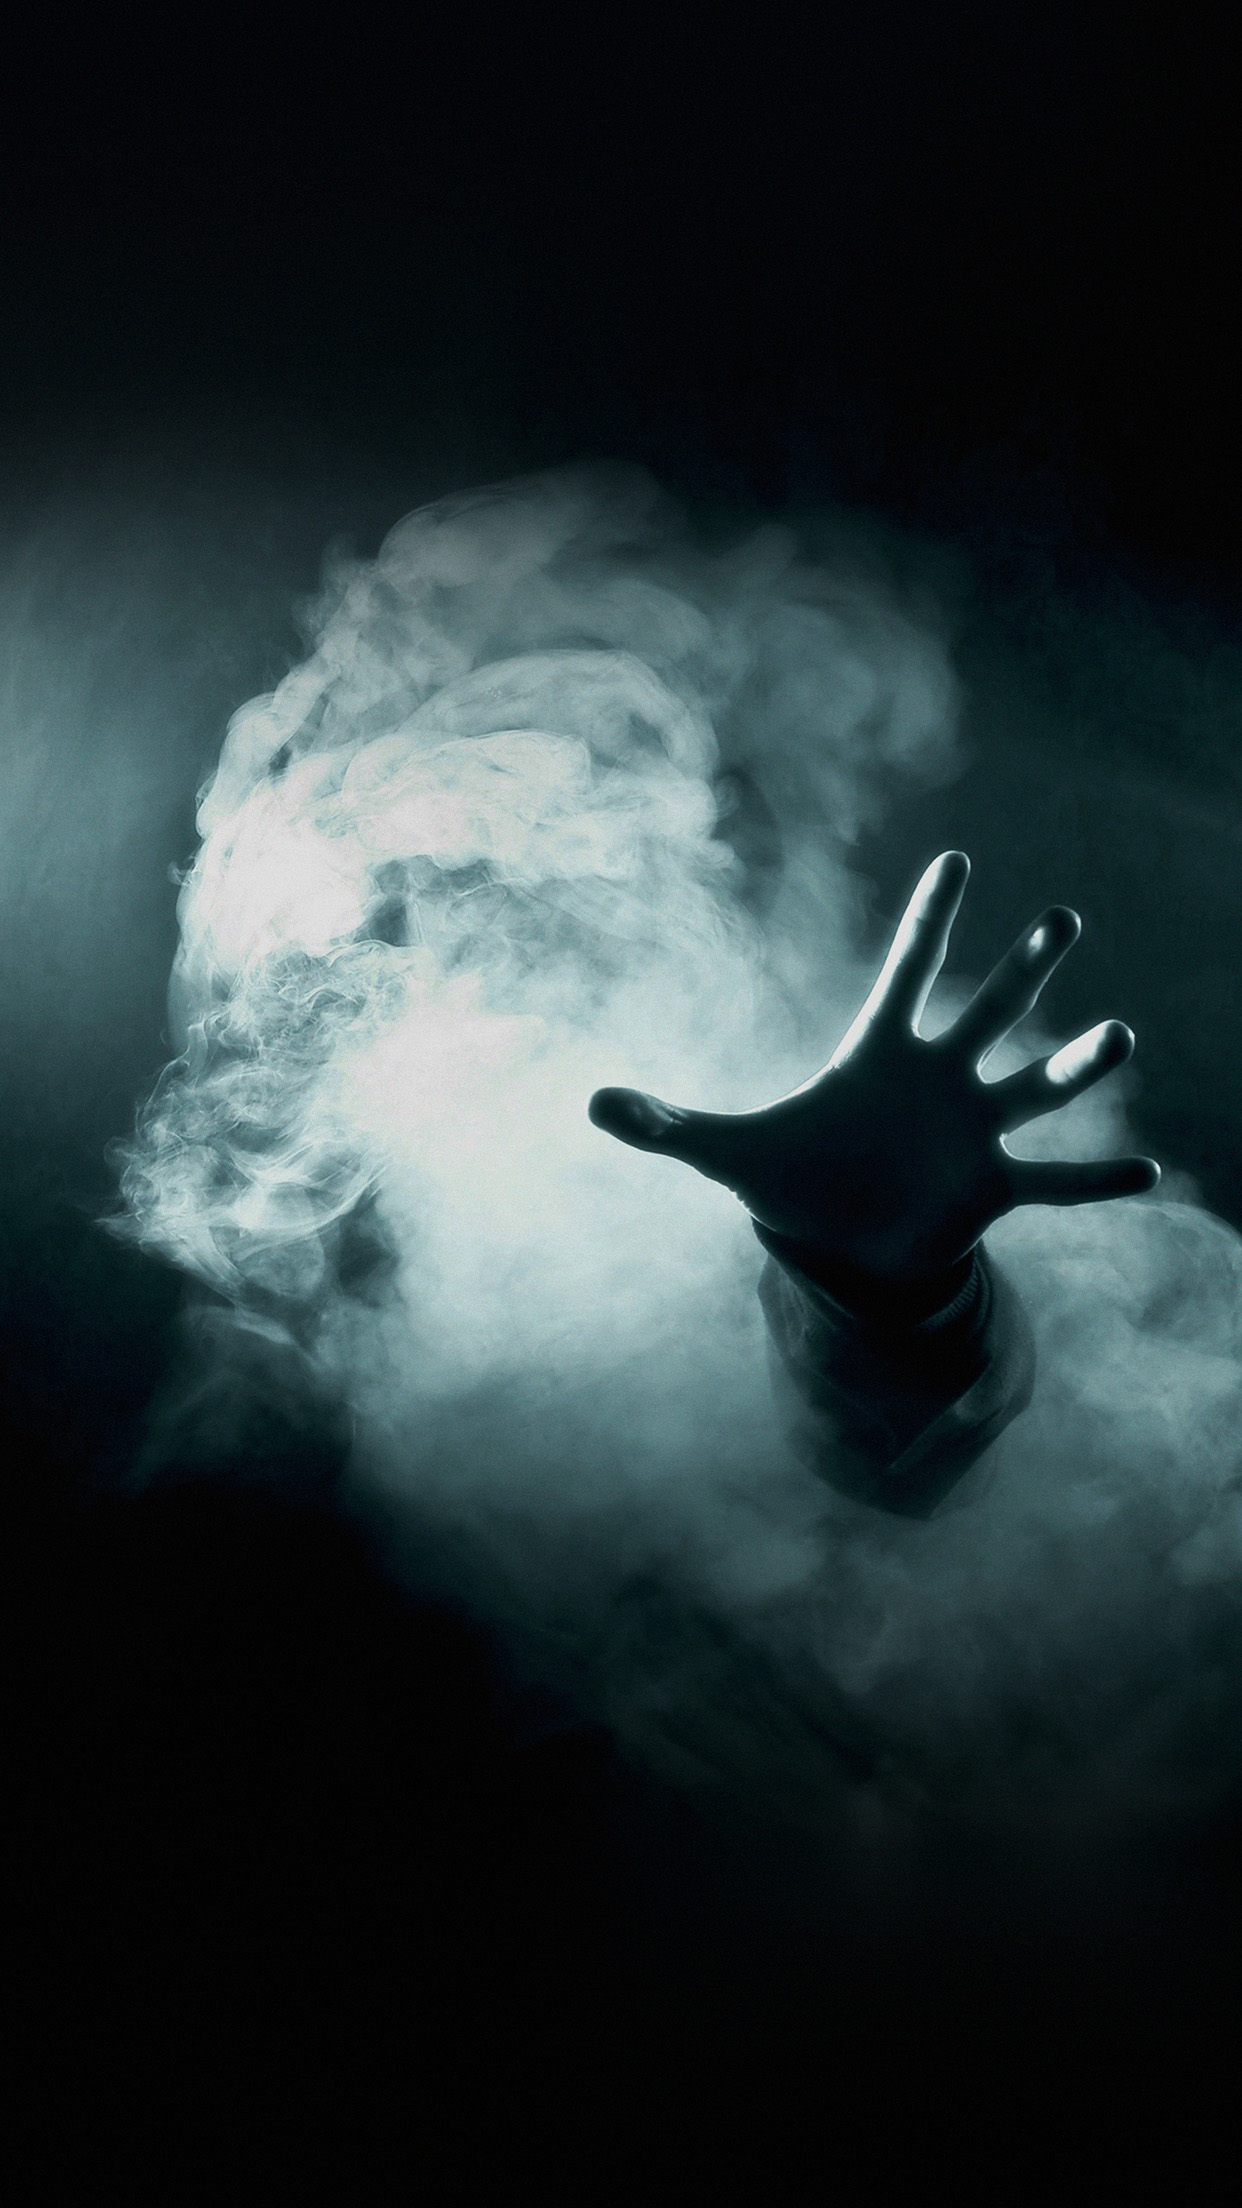 Hand Reaching Out From Smoke Horror Android Wallpaper